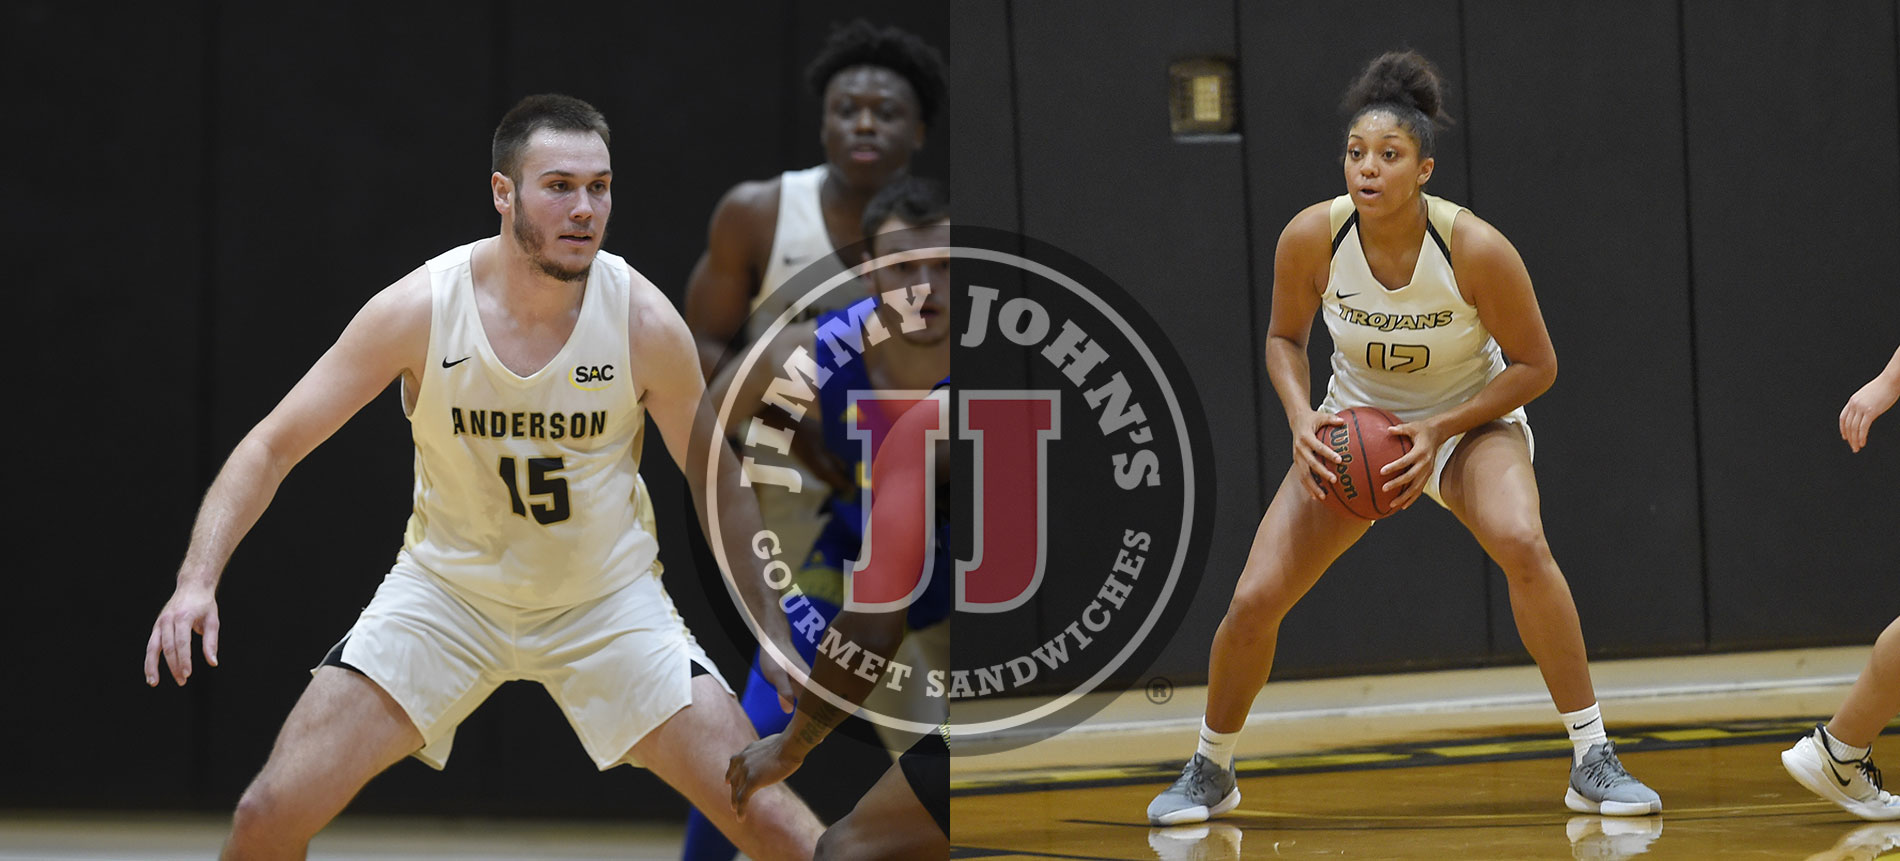 Michel and Livingston Named Jimmy John’s Female and Male Athletes of the Week